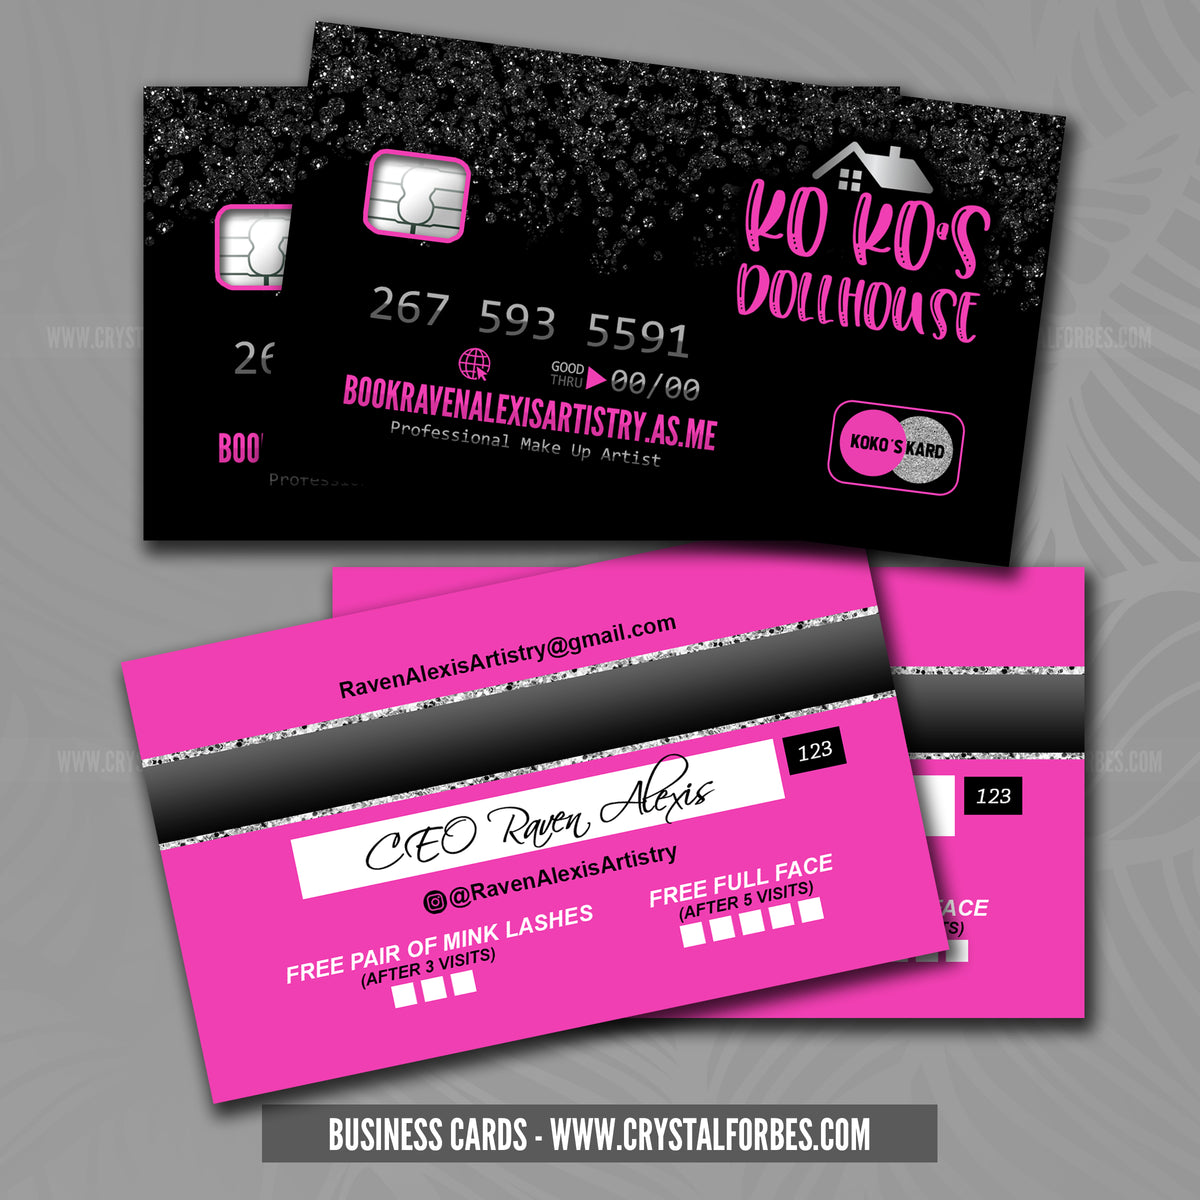 Business Cards Credit Card Style Crystal Forbes Design Studio